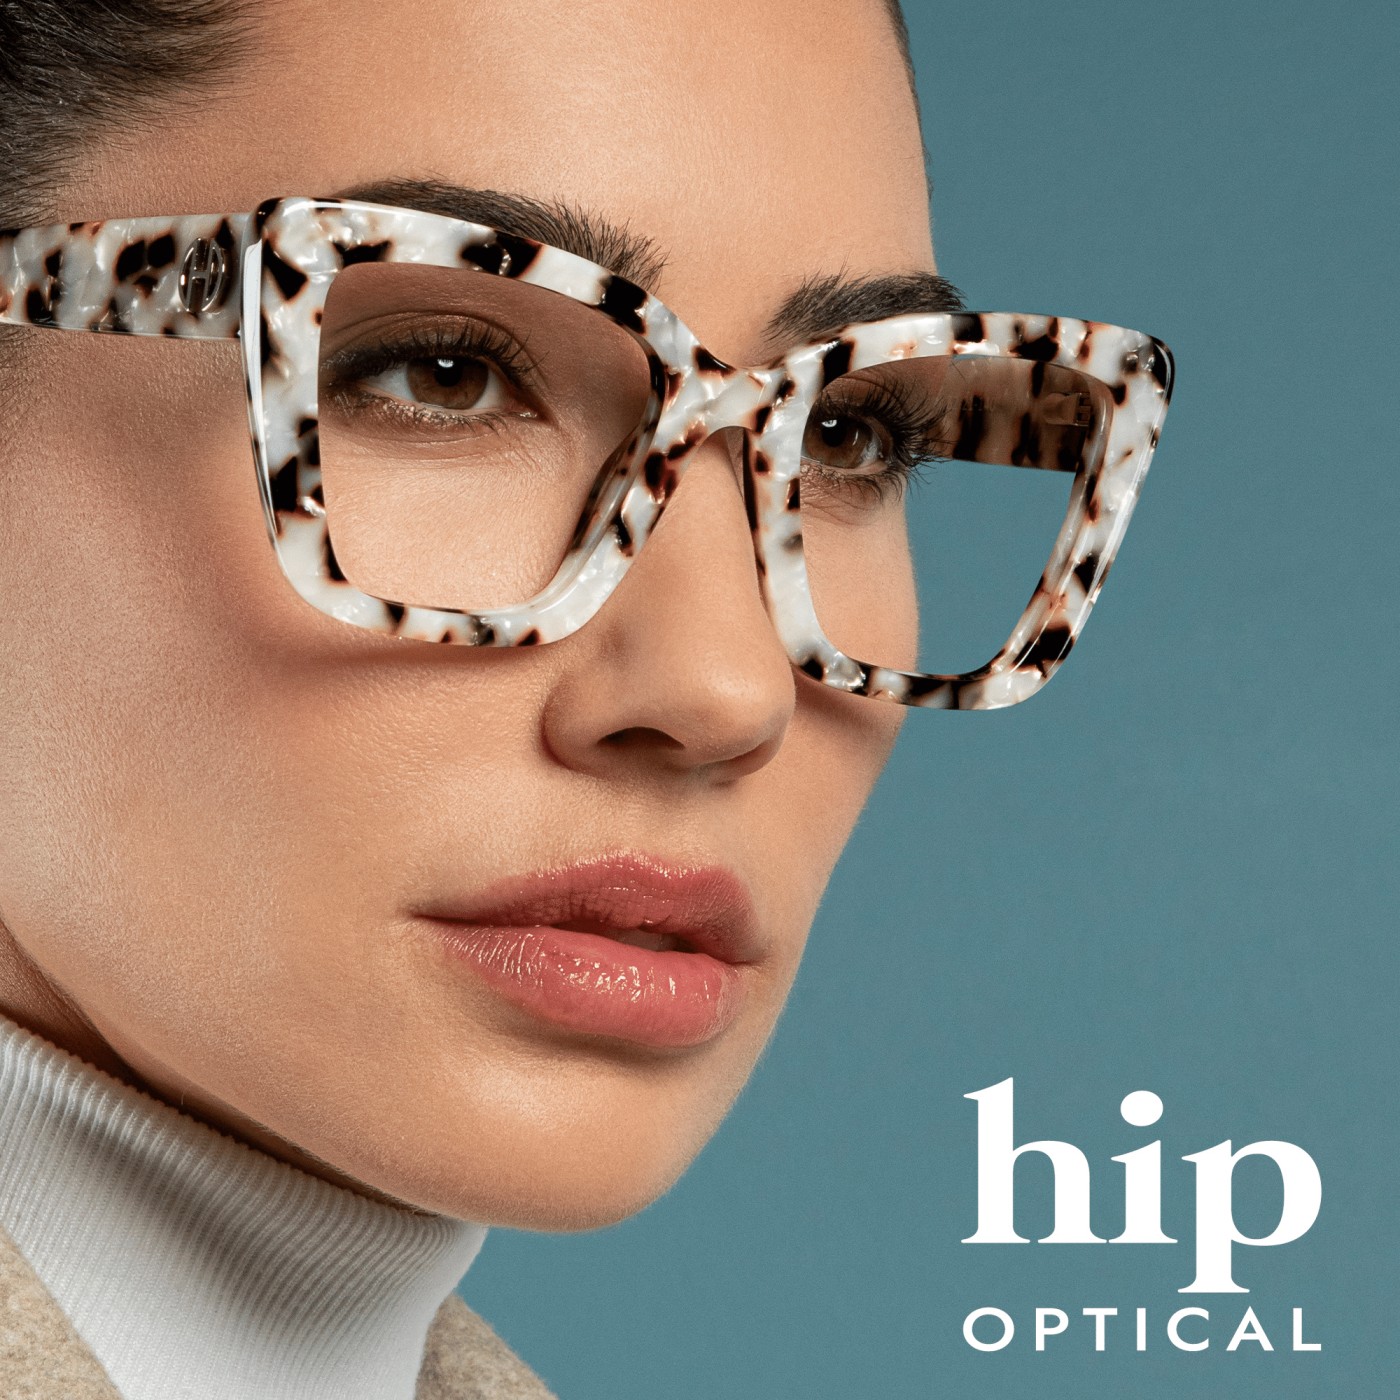 Eyewear Brand Hip Continues Its Rapid Expansion Newswire